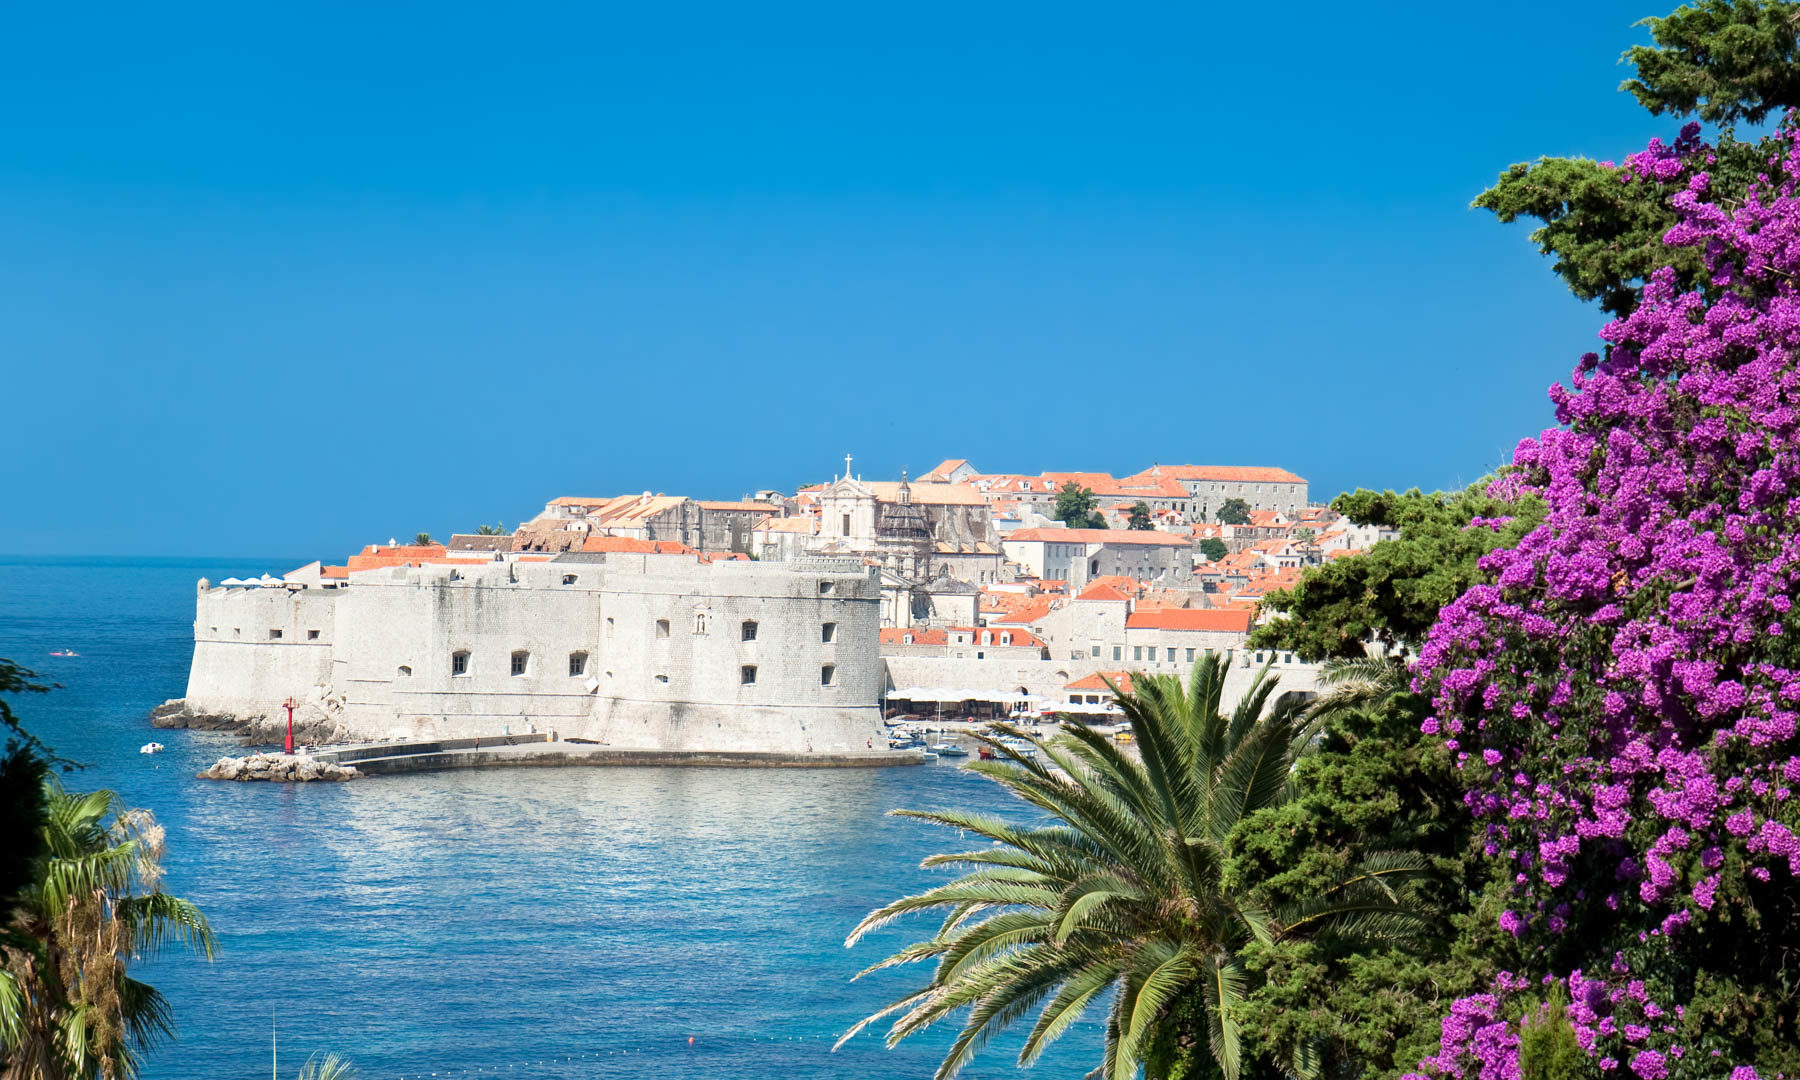 The Best Things to do in Dubrovnik, Croatia